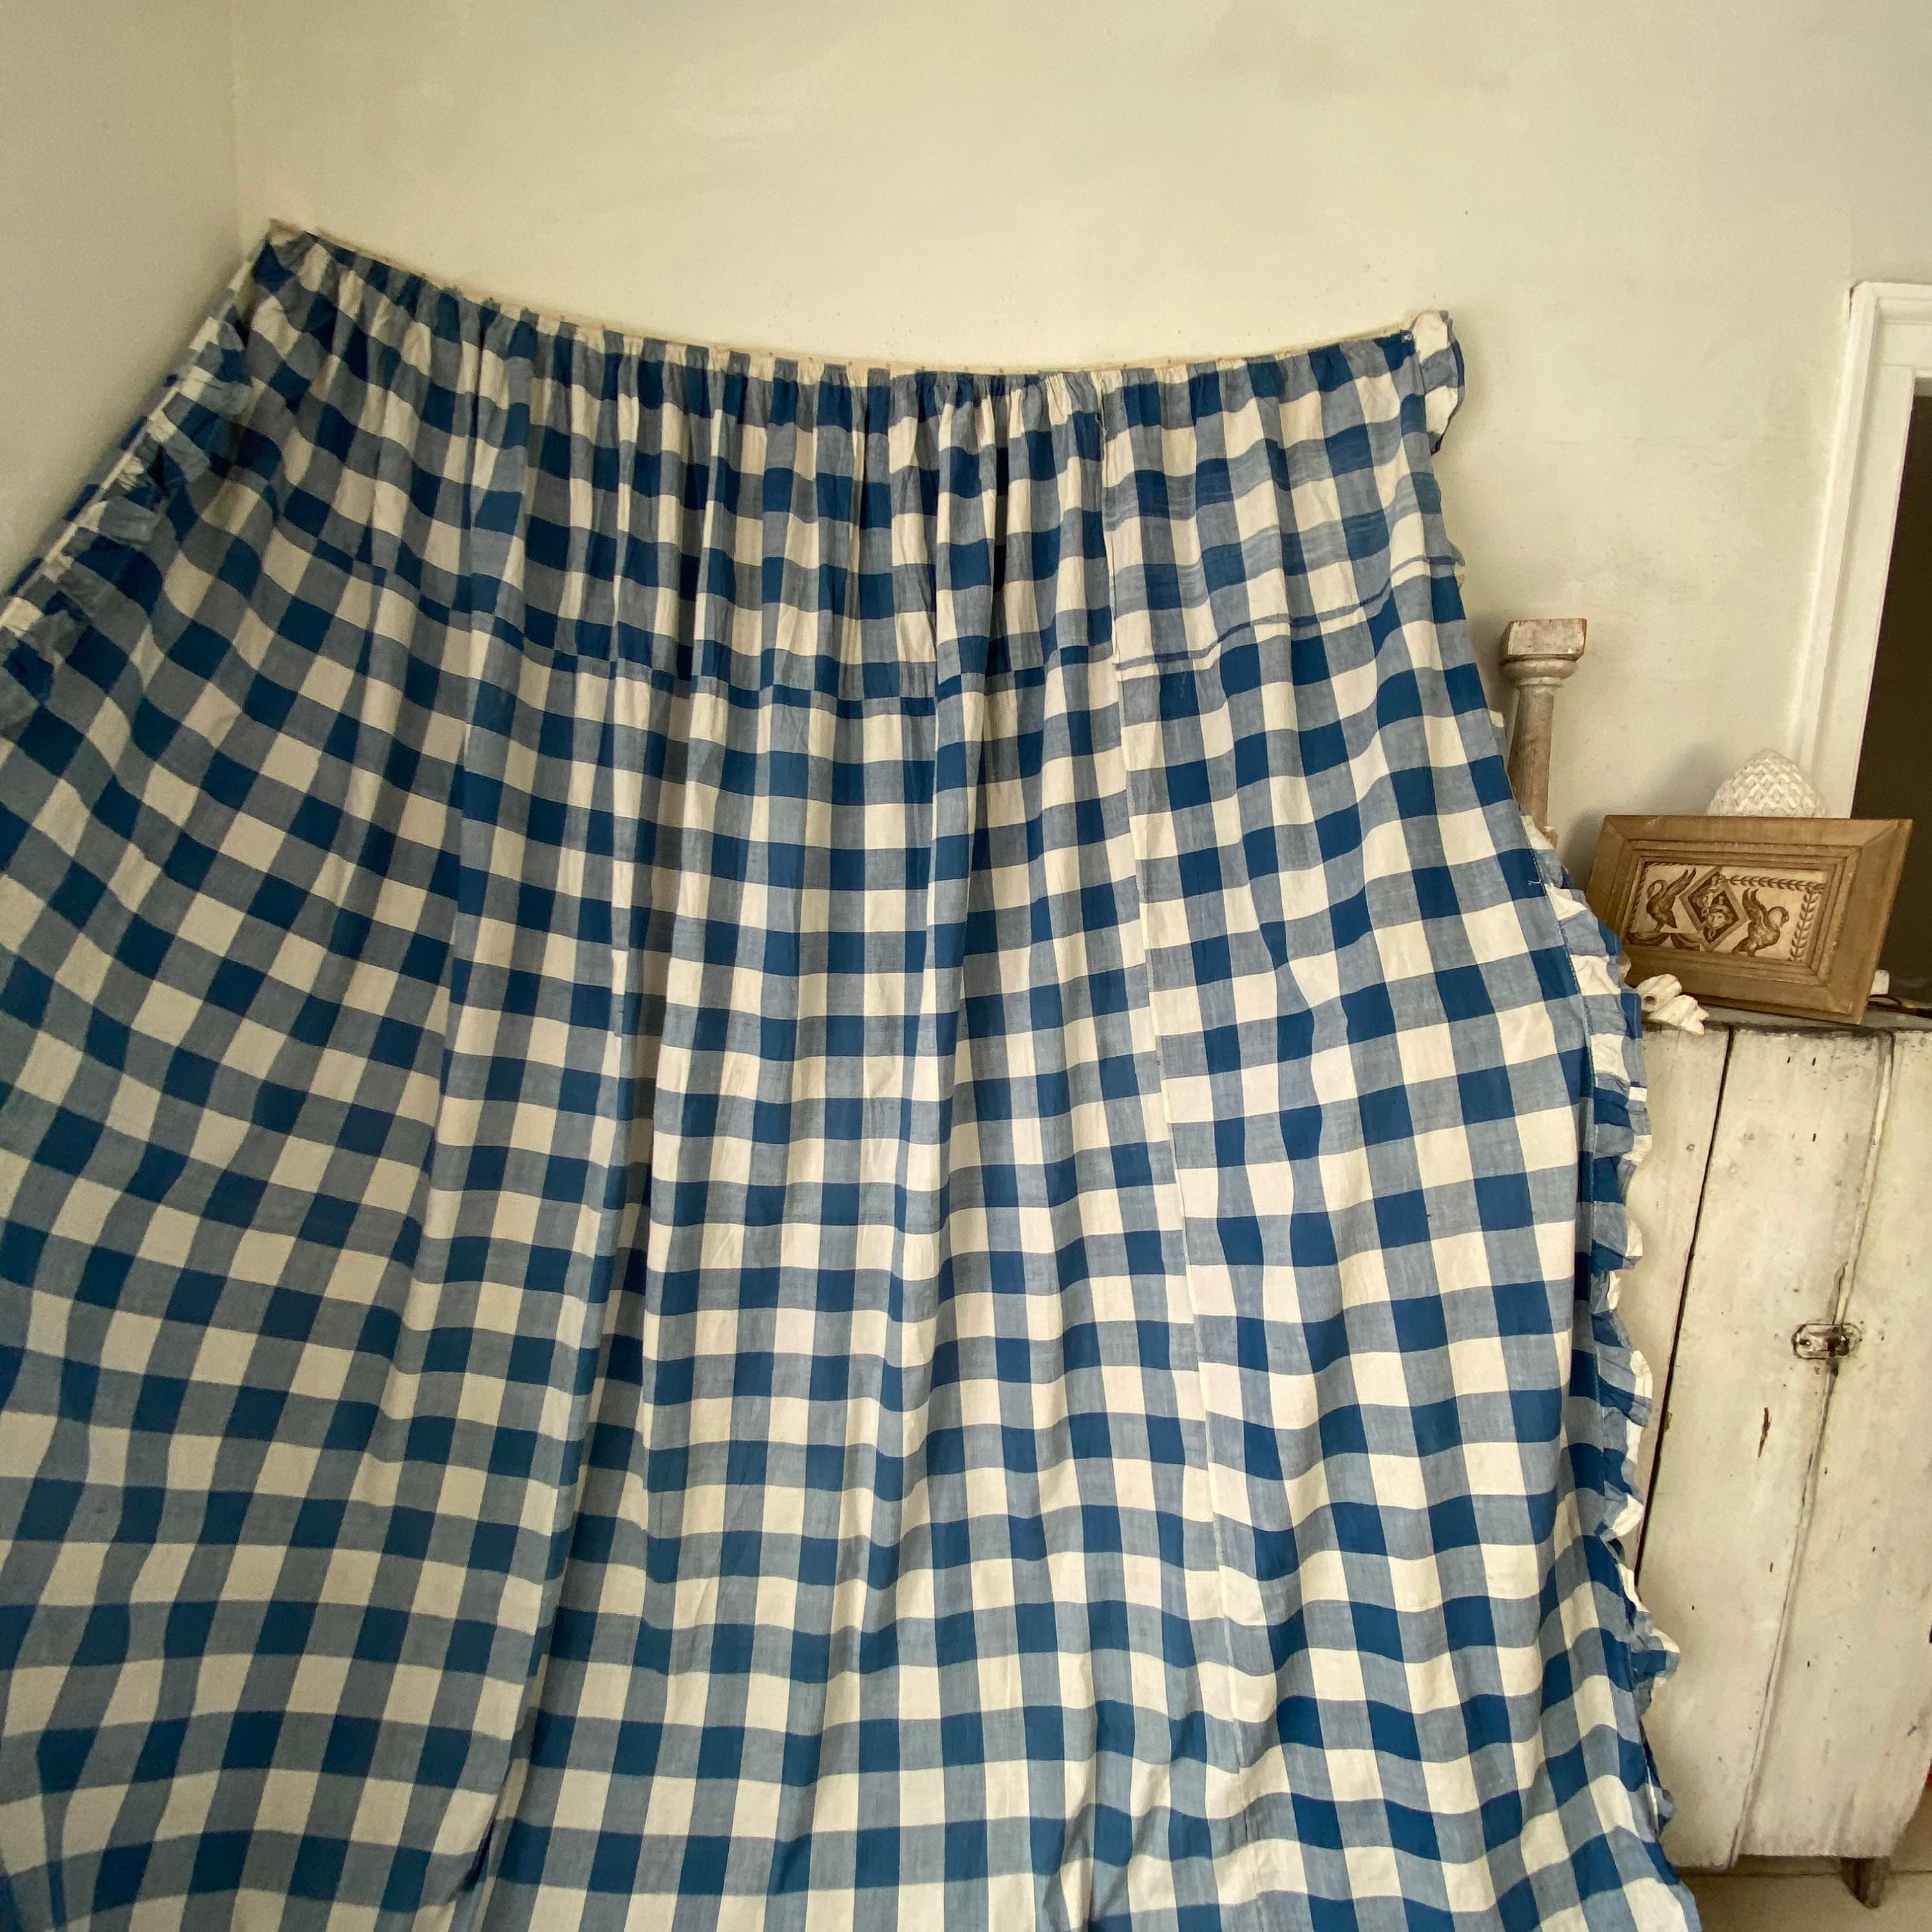 Blue Vichy Check Curtain 18th Century Old Fabric Material - Etsy